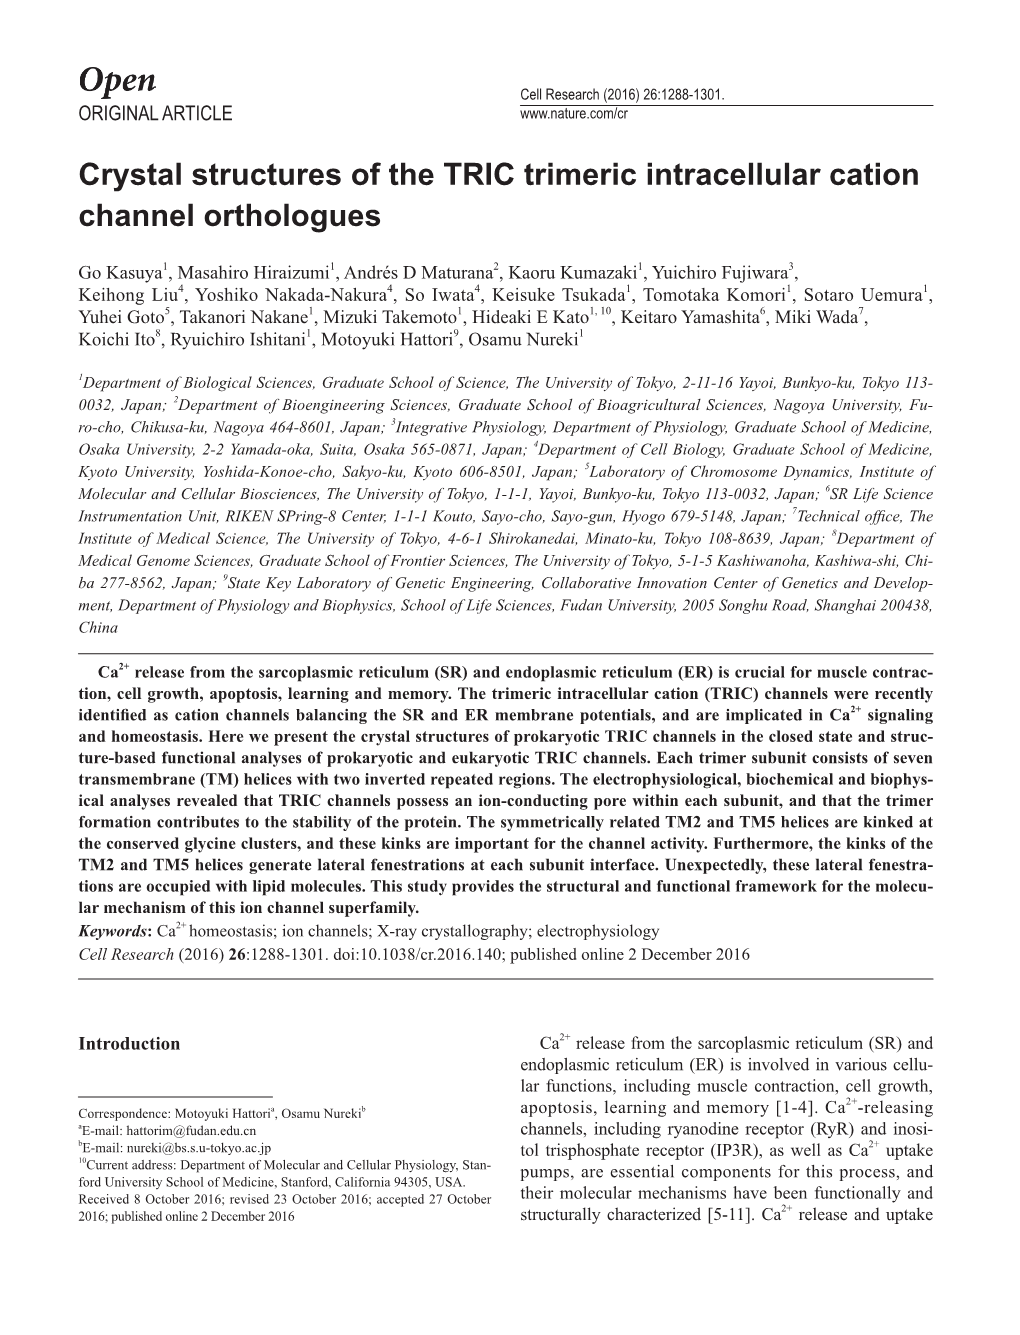 Crystal Structures of the TRIC Trimeric Intracellular Cation Channel Orthologues